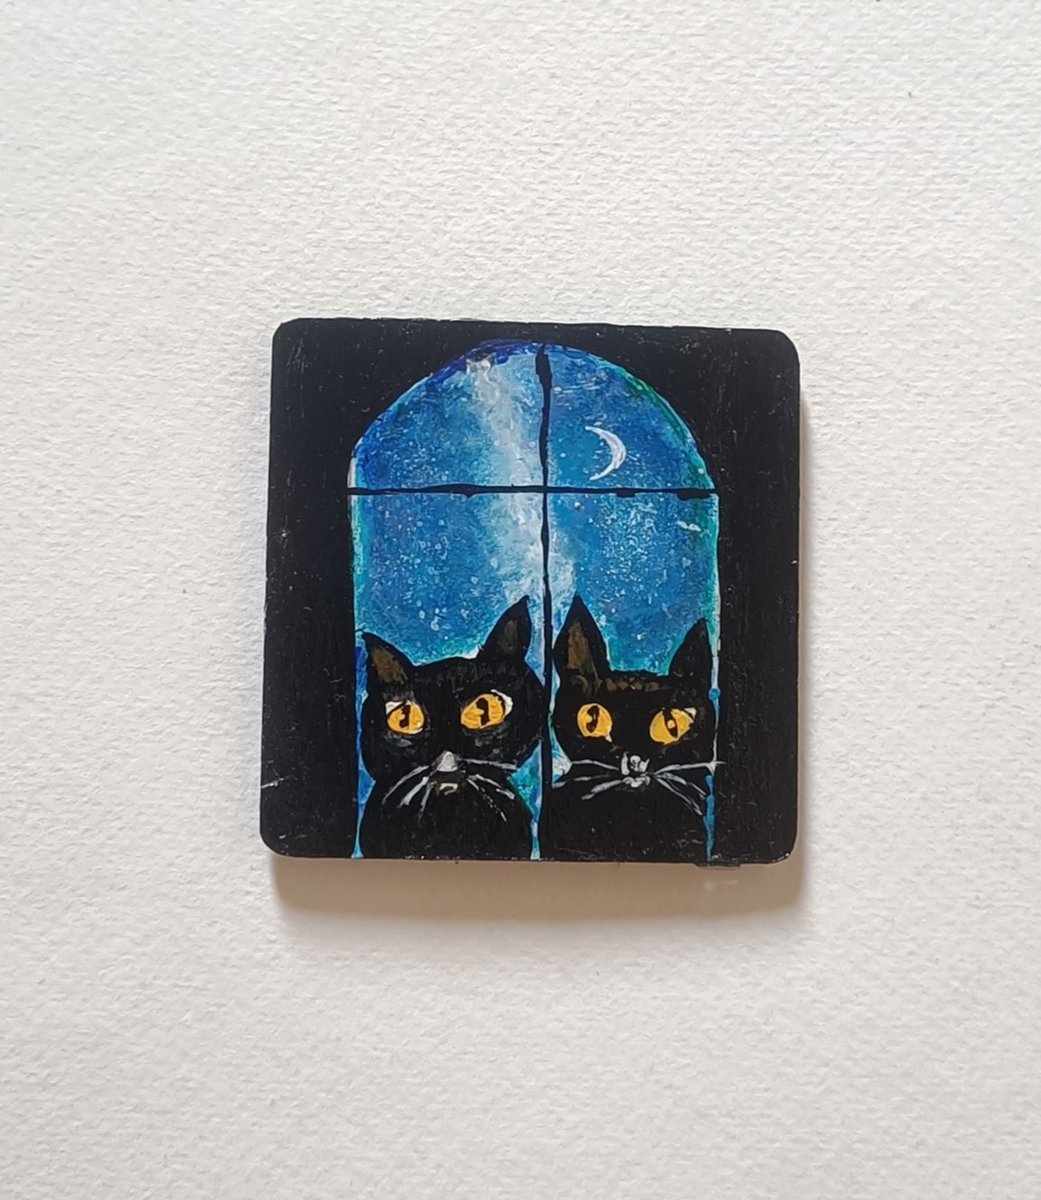 The earrings are sold out. Buy these wooden handpainted #FridgeMagnets for yourself or to gift someone. The size is Size: 3 in X 3 in X 3mm square. Please share. Let me know if you want me to paint something for you. Follow #ArtbyTee #giftidea #handmade #handmadegift #homedecor